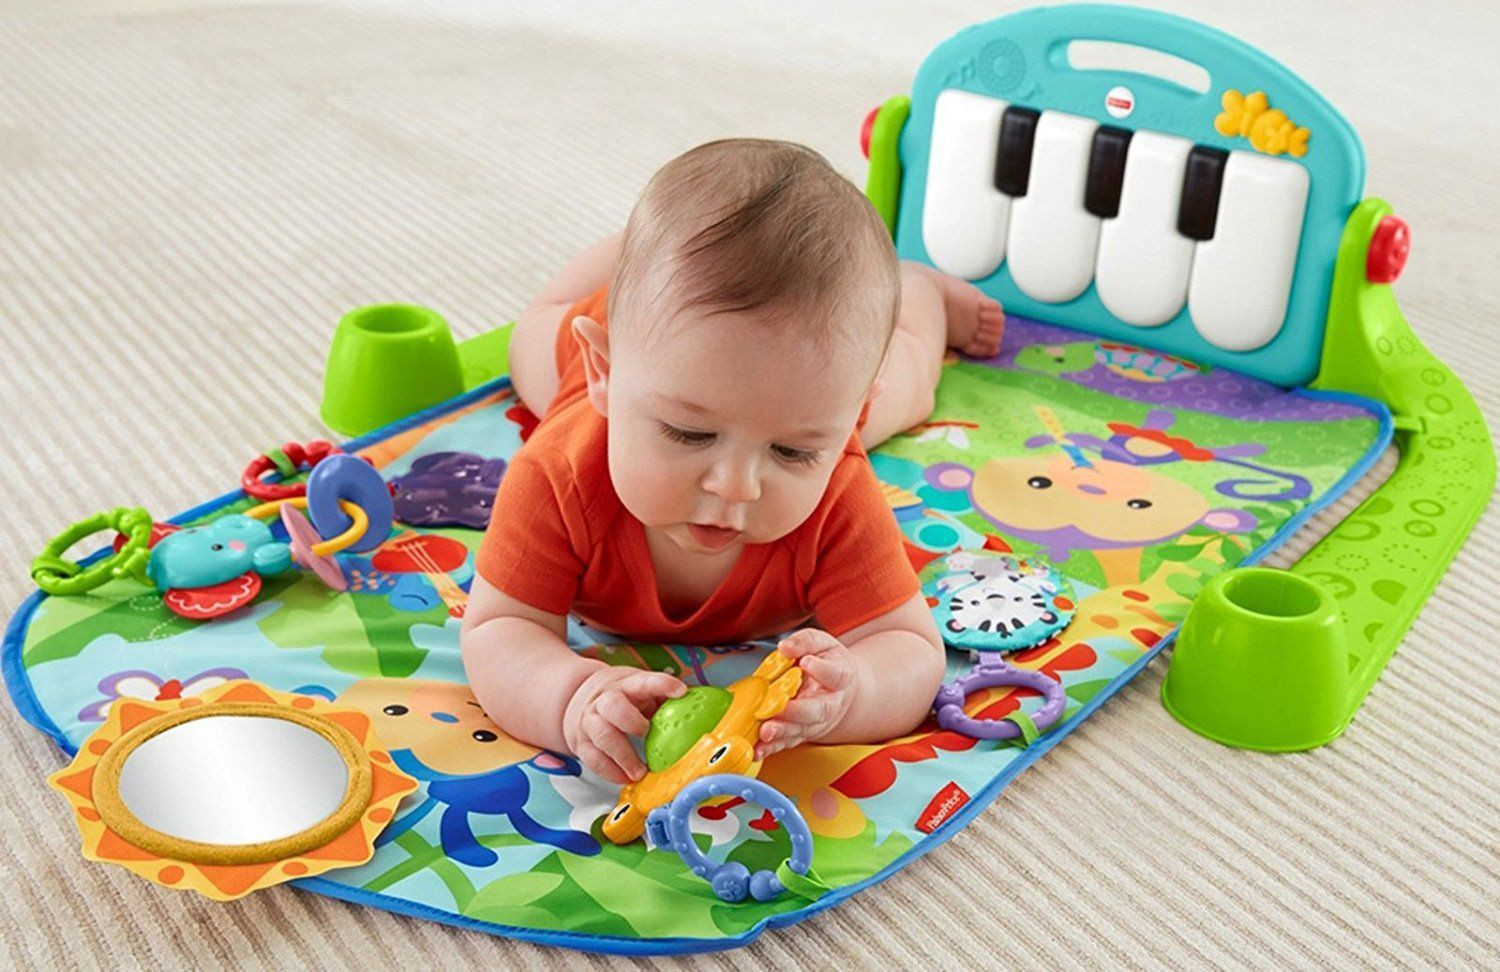 Best Boy Baby Gifts
 The 34 Best Baby Gifts of 2020